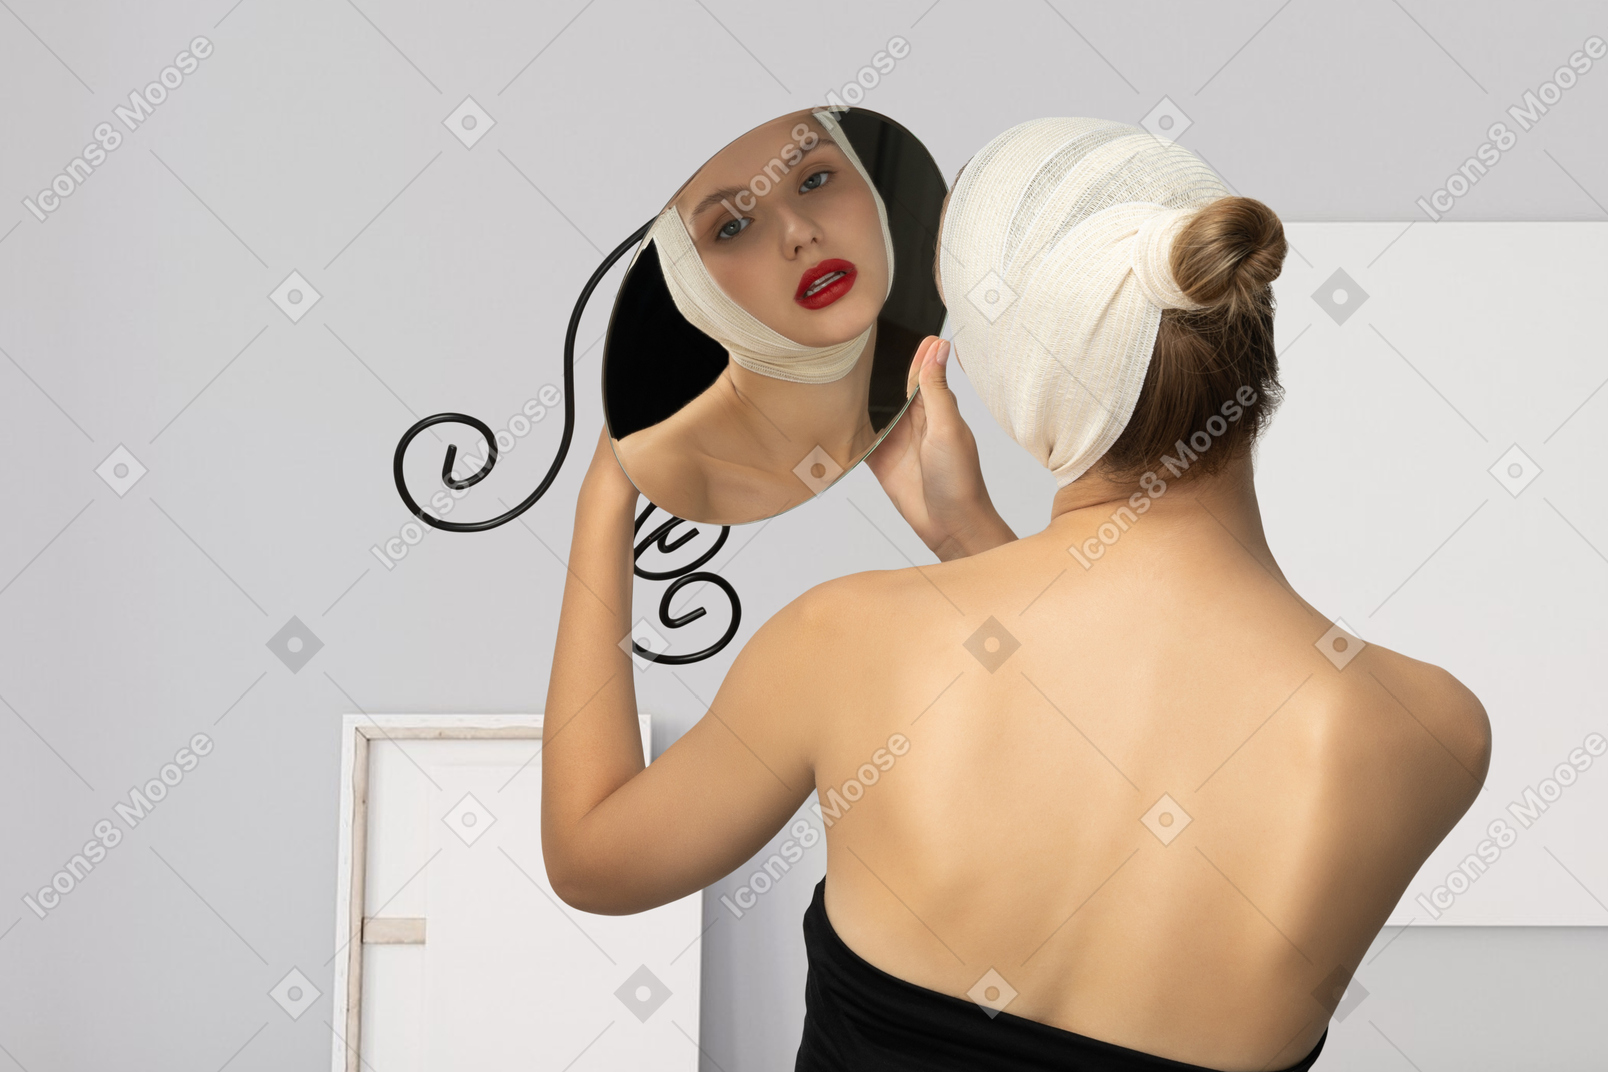 A woman with a bandage on her head is looking at herself in the mirror